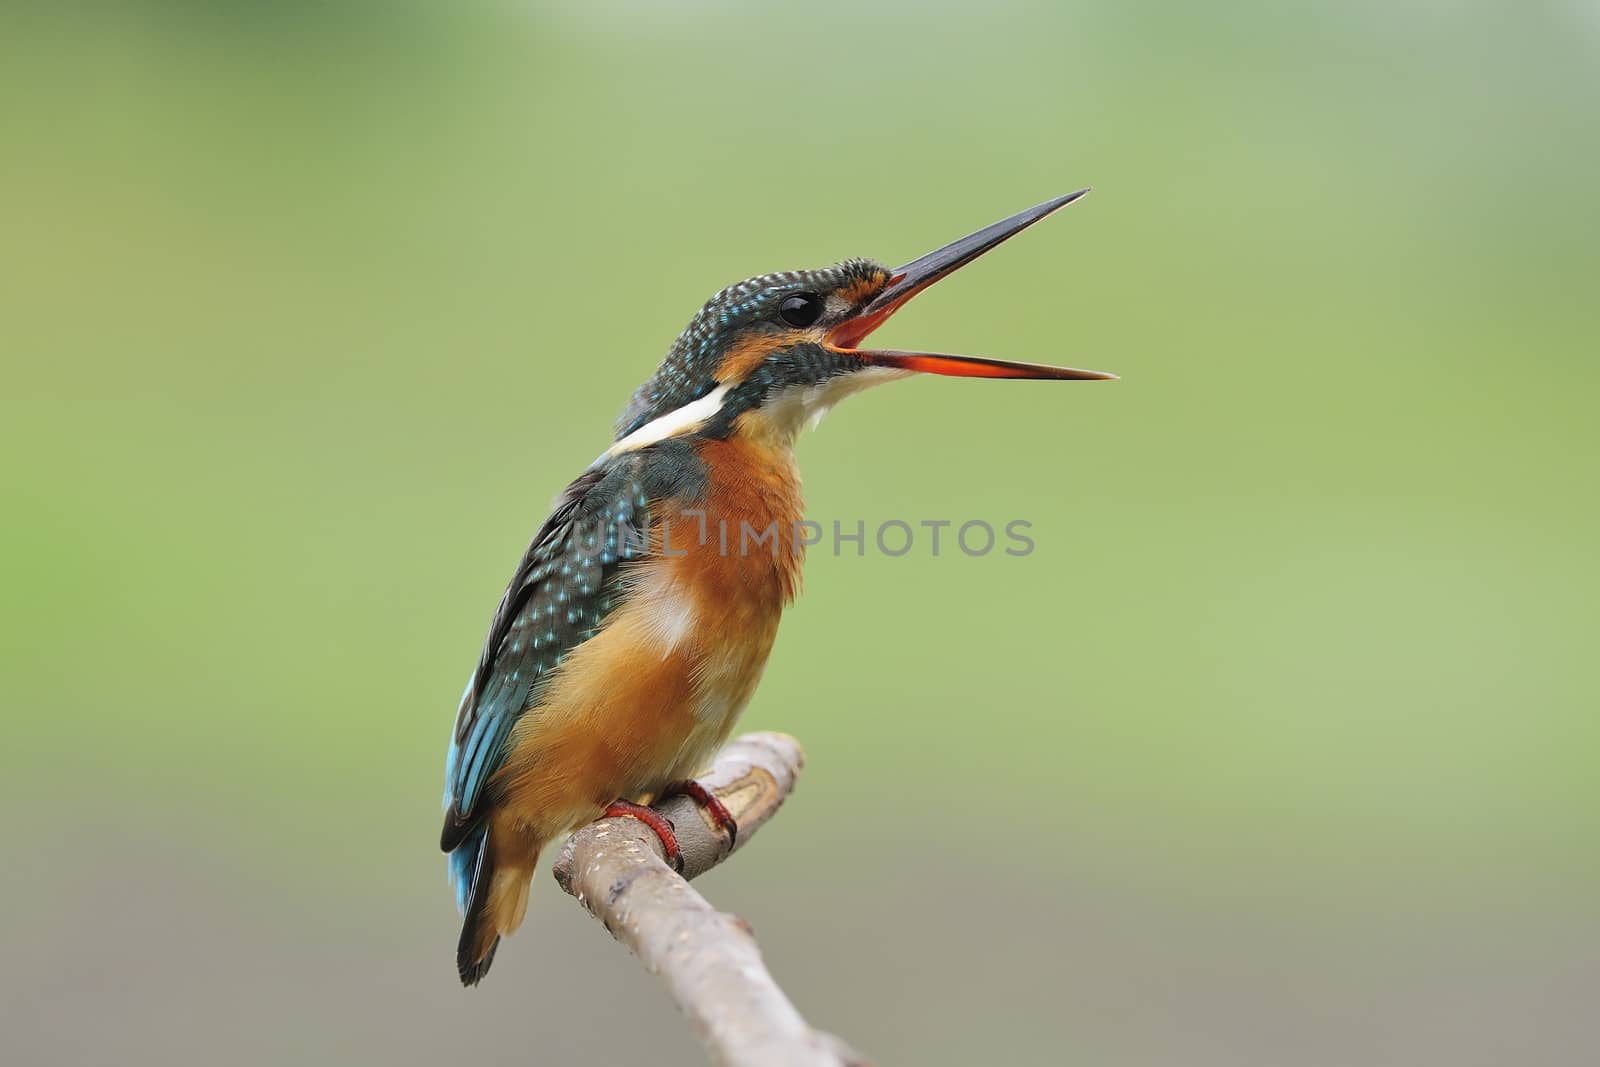 Common Kingfisher (Alcedo atthis)
This picture is female. She is sitting on perch for resting and open her mouth, taken picture from the Mahachai Mangrove Research Station in Thailand.
